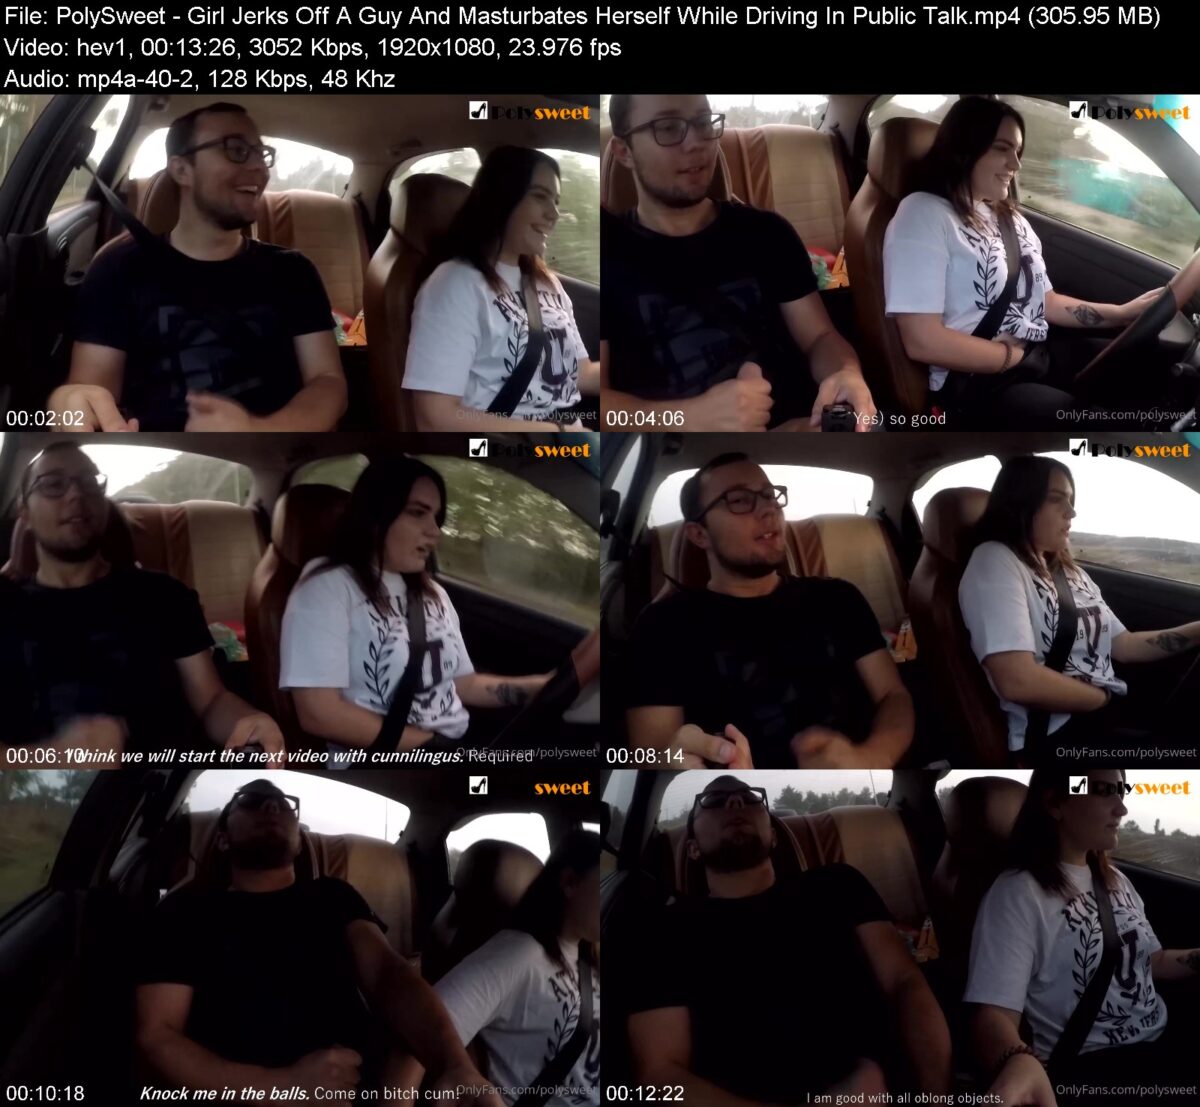 PolySweet - Girl Jerks Off A Guy And Masturbates Herself While Driving In Public Talk